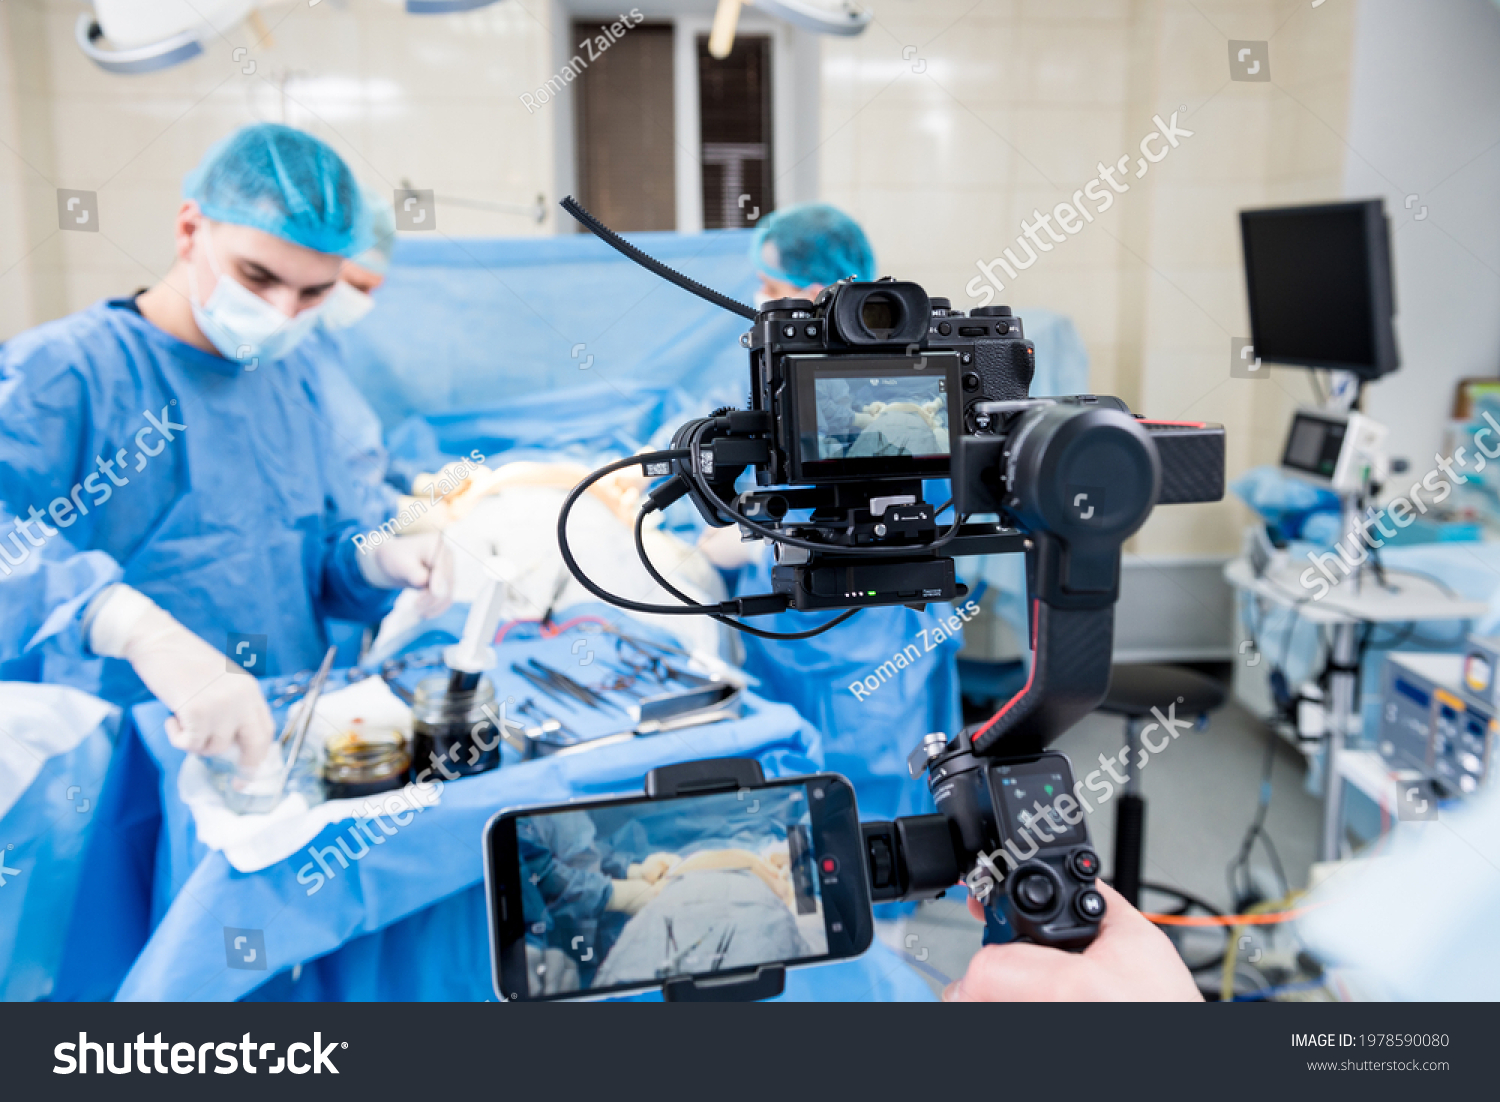 The videographer shoot the surgeon and assistants in the operating room with surgical equipment #1978590080